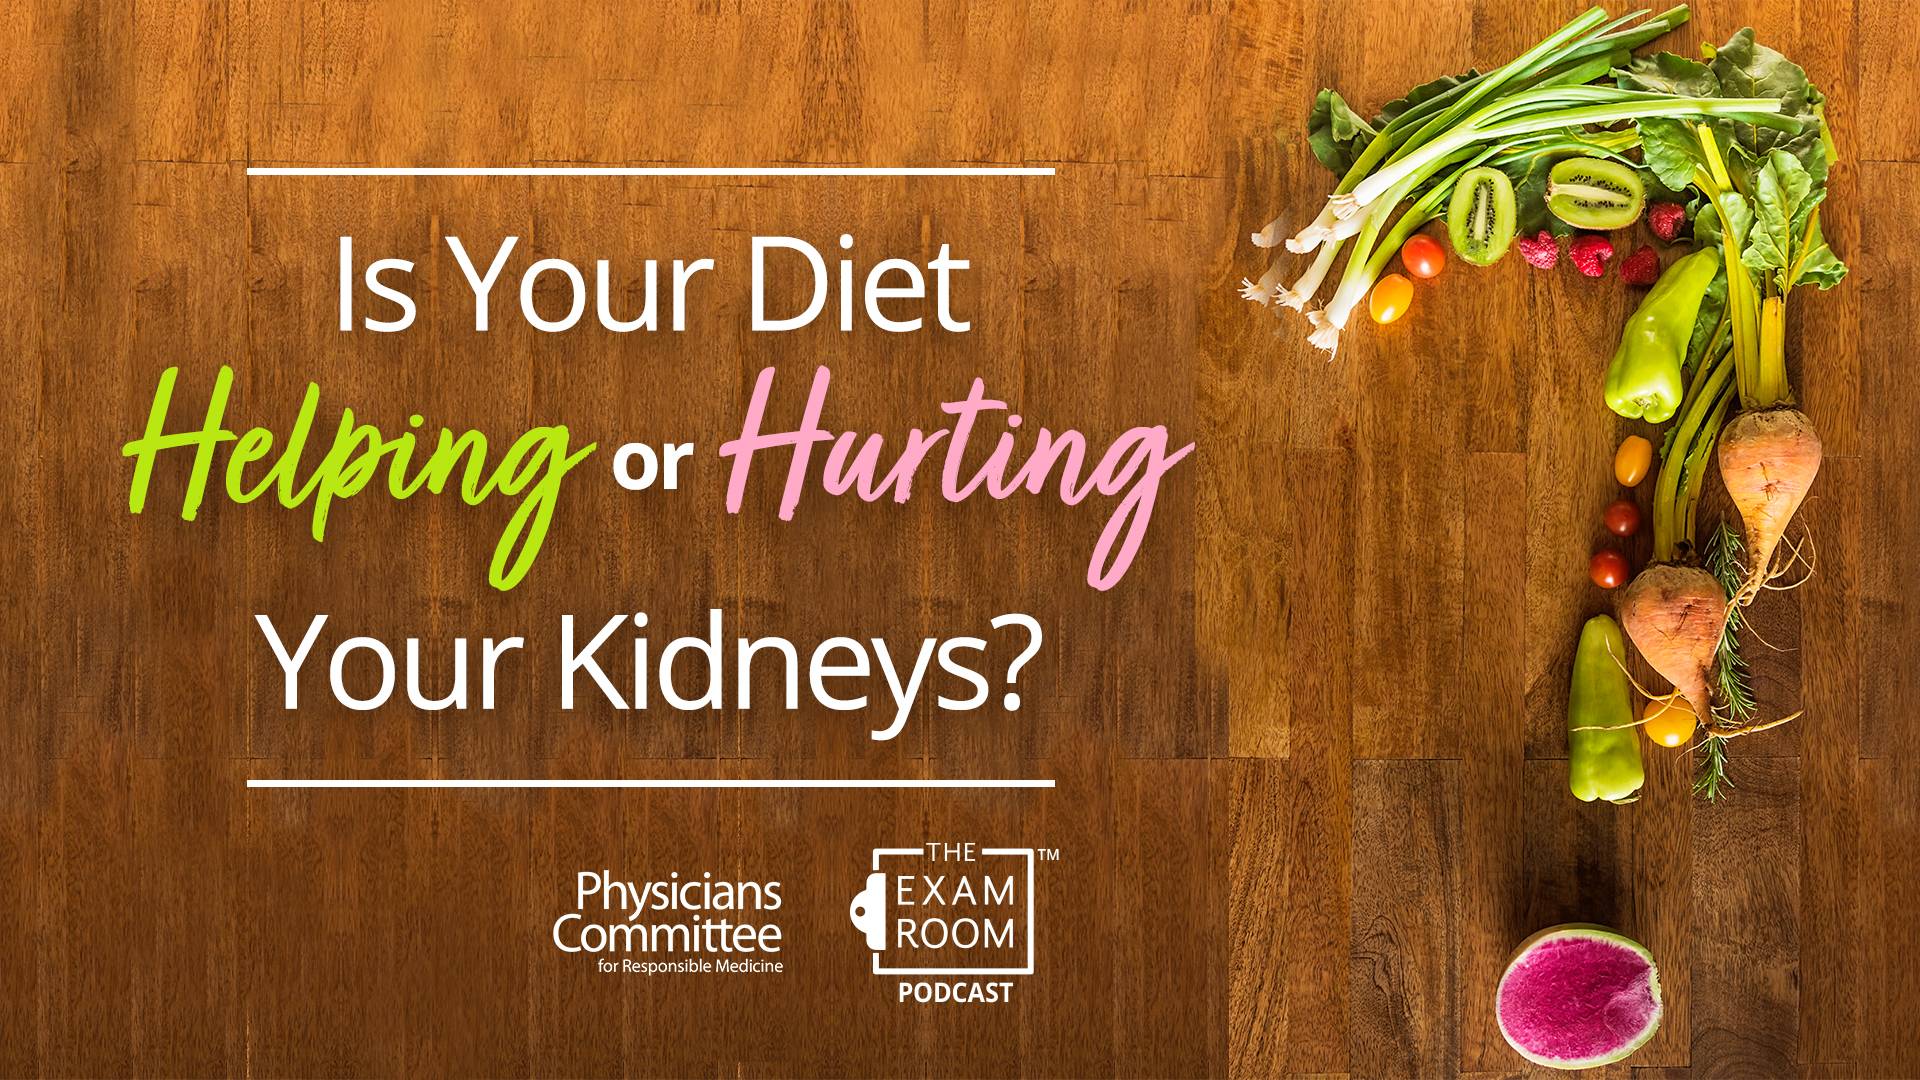 Is Your Diet Helping or Hurting Your Kidneys?